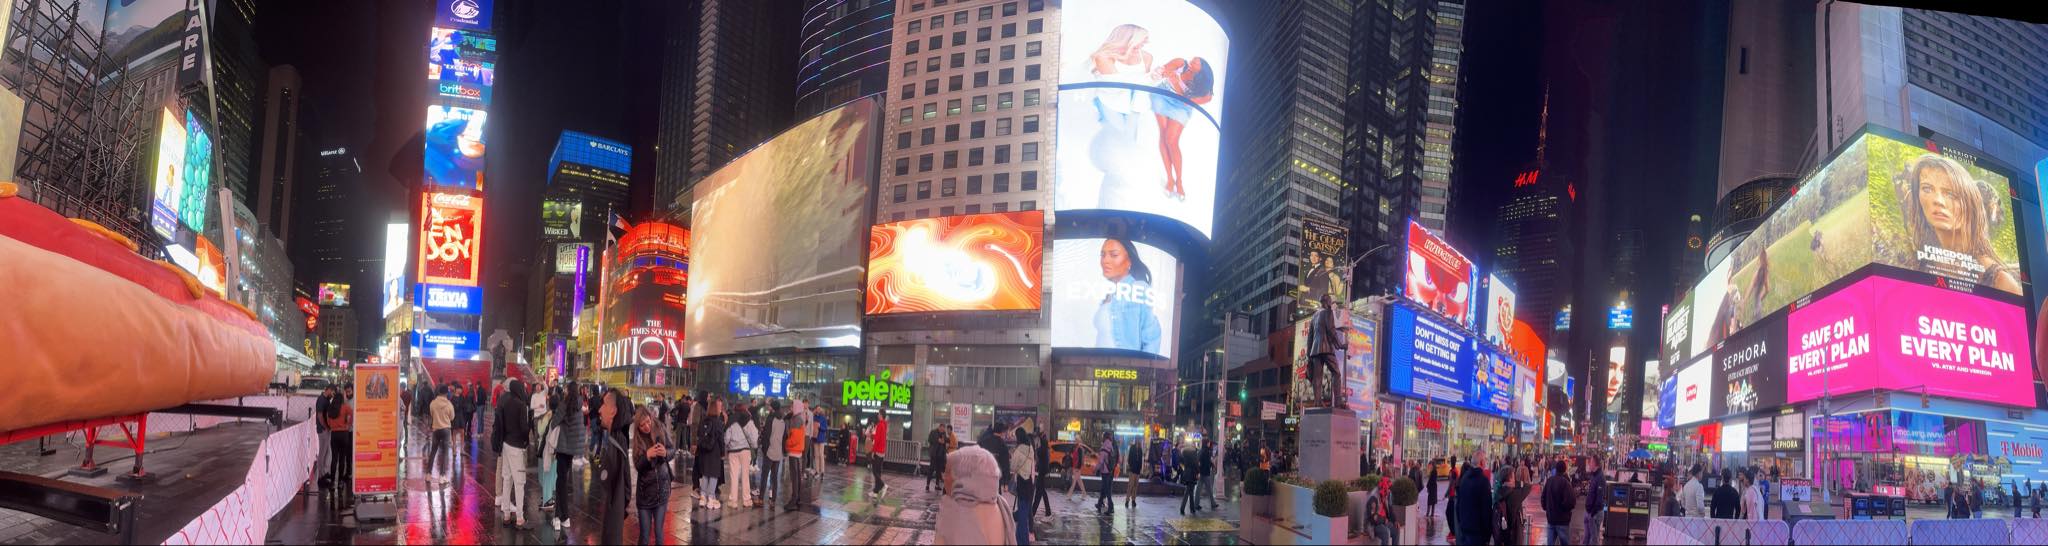 Times square at night